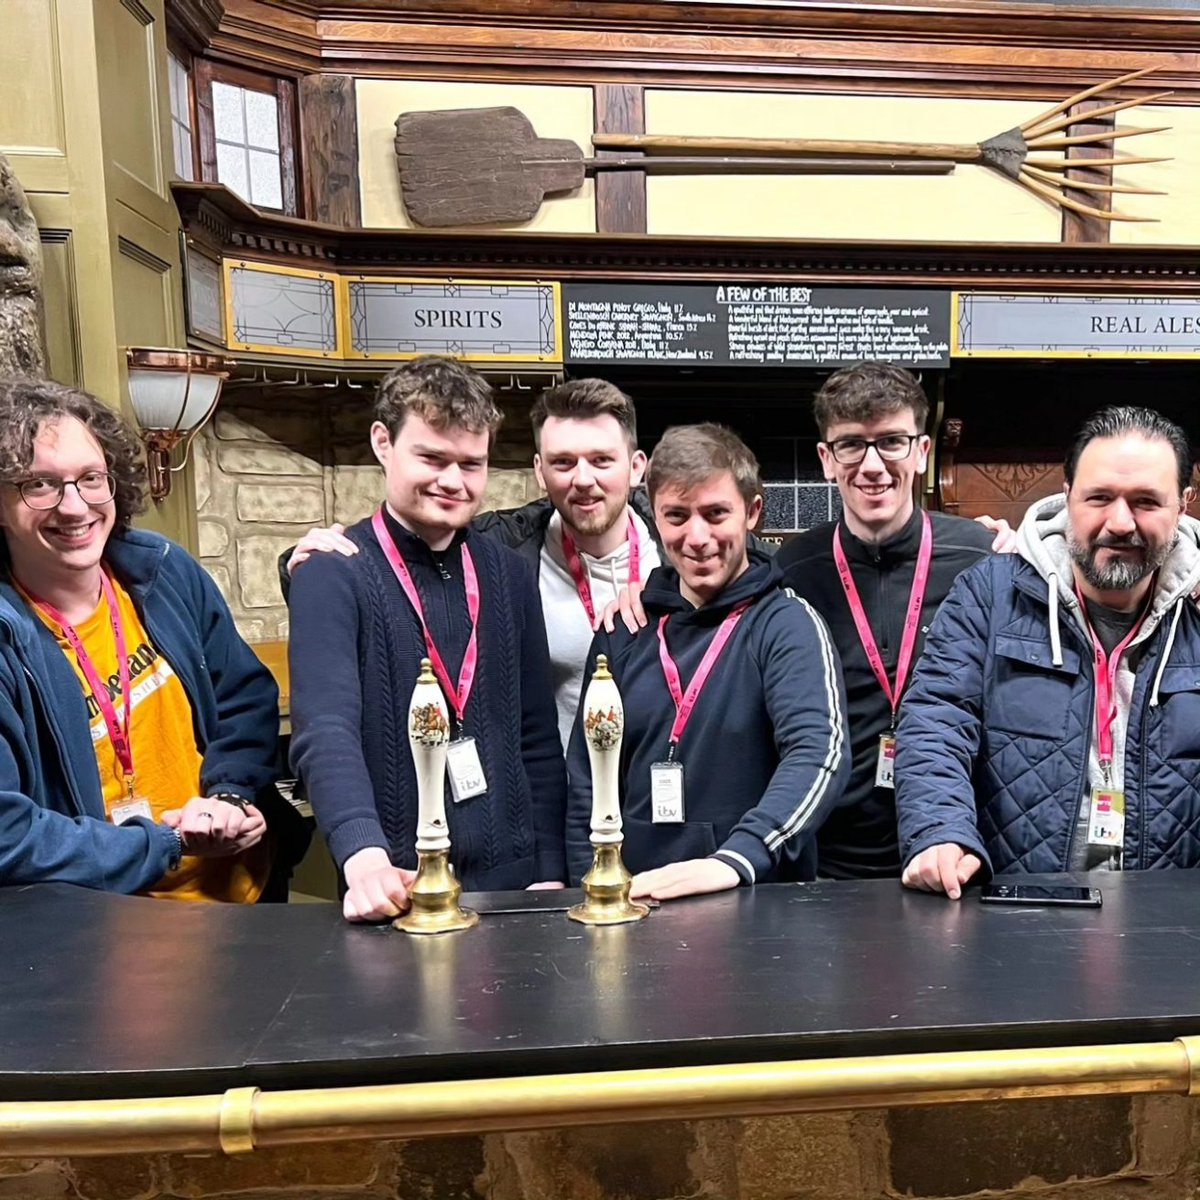 Last week our Traineeship in TV & Film Production students travelled to Leeds to the National Film and Television School @nftsfilmtv for a cinematography 🎥workshop at @itvstudios, including a visit to the set of British soap #Emmerdale. Pint in the Woolpack anyone? 🍺.